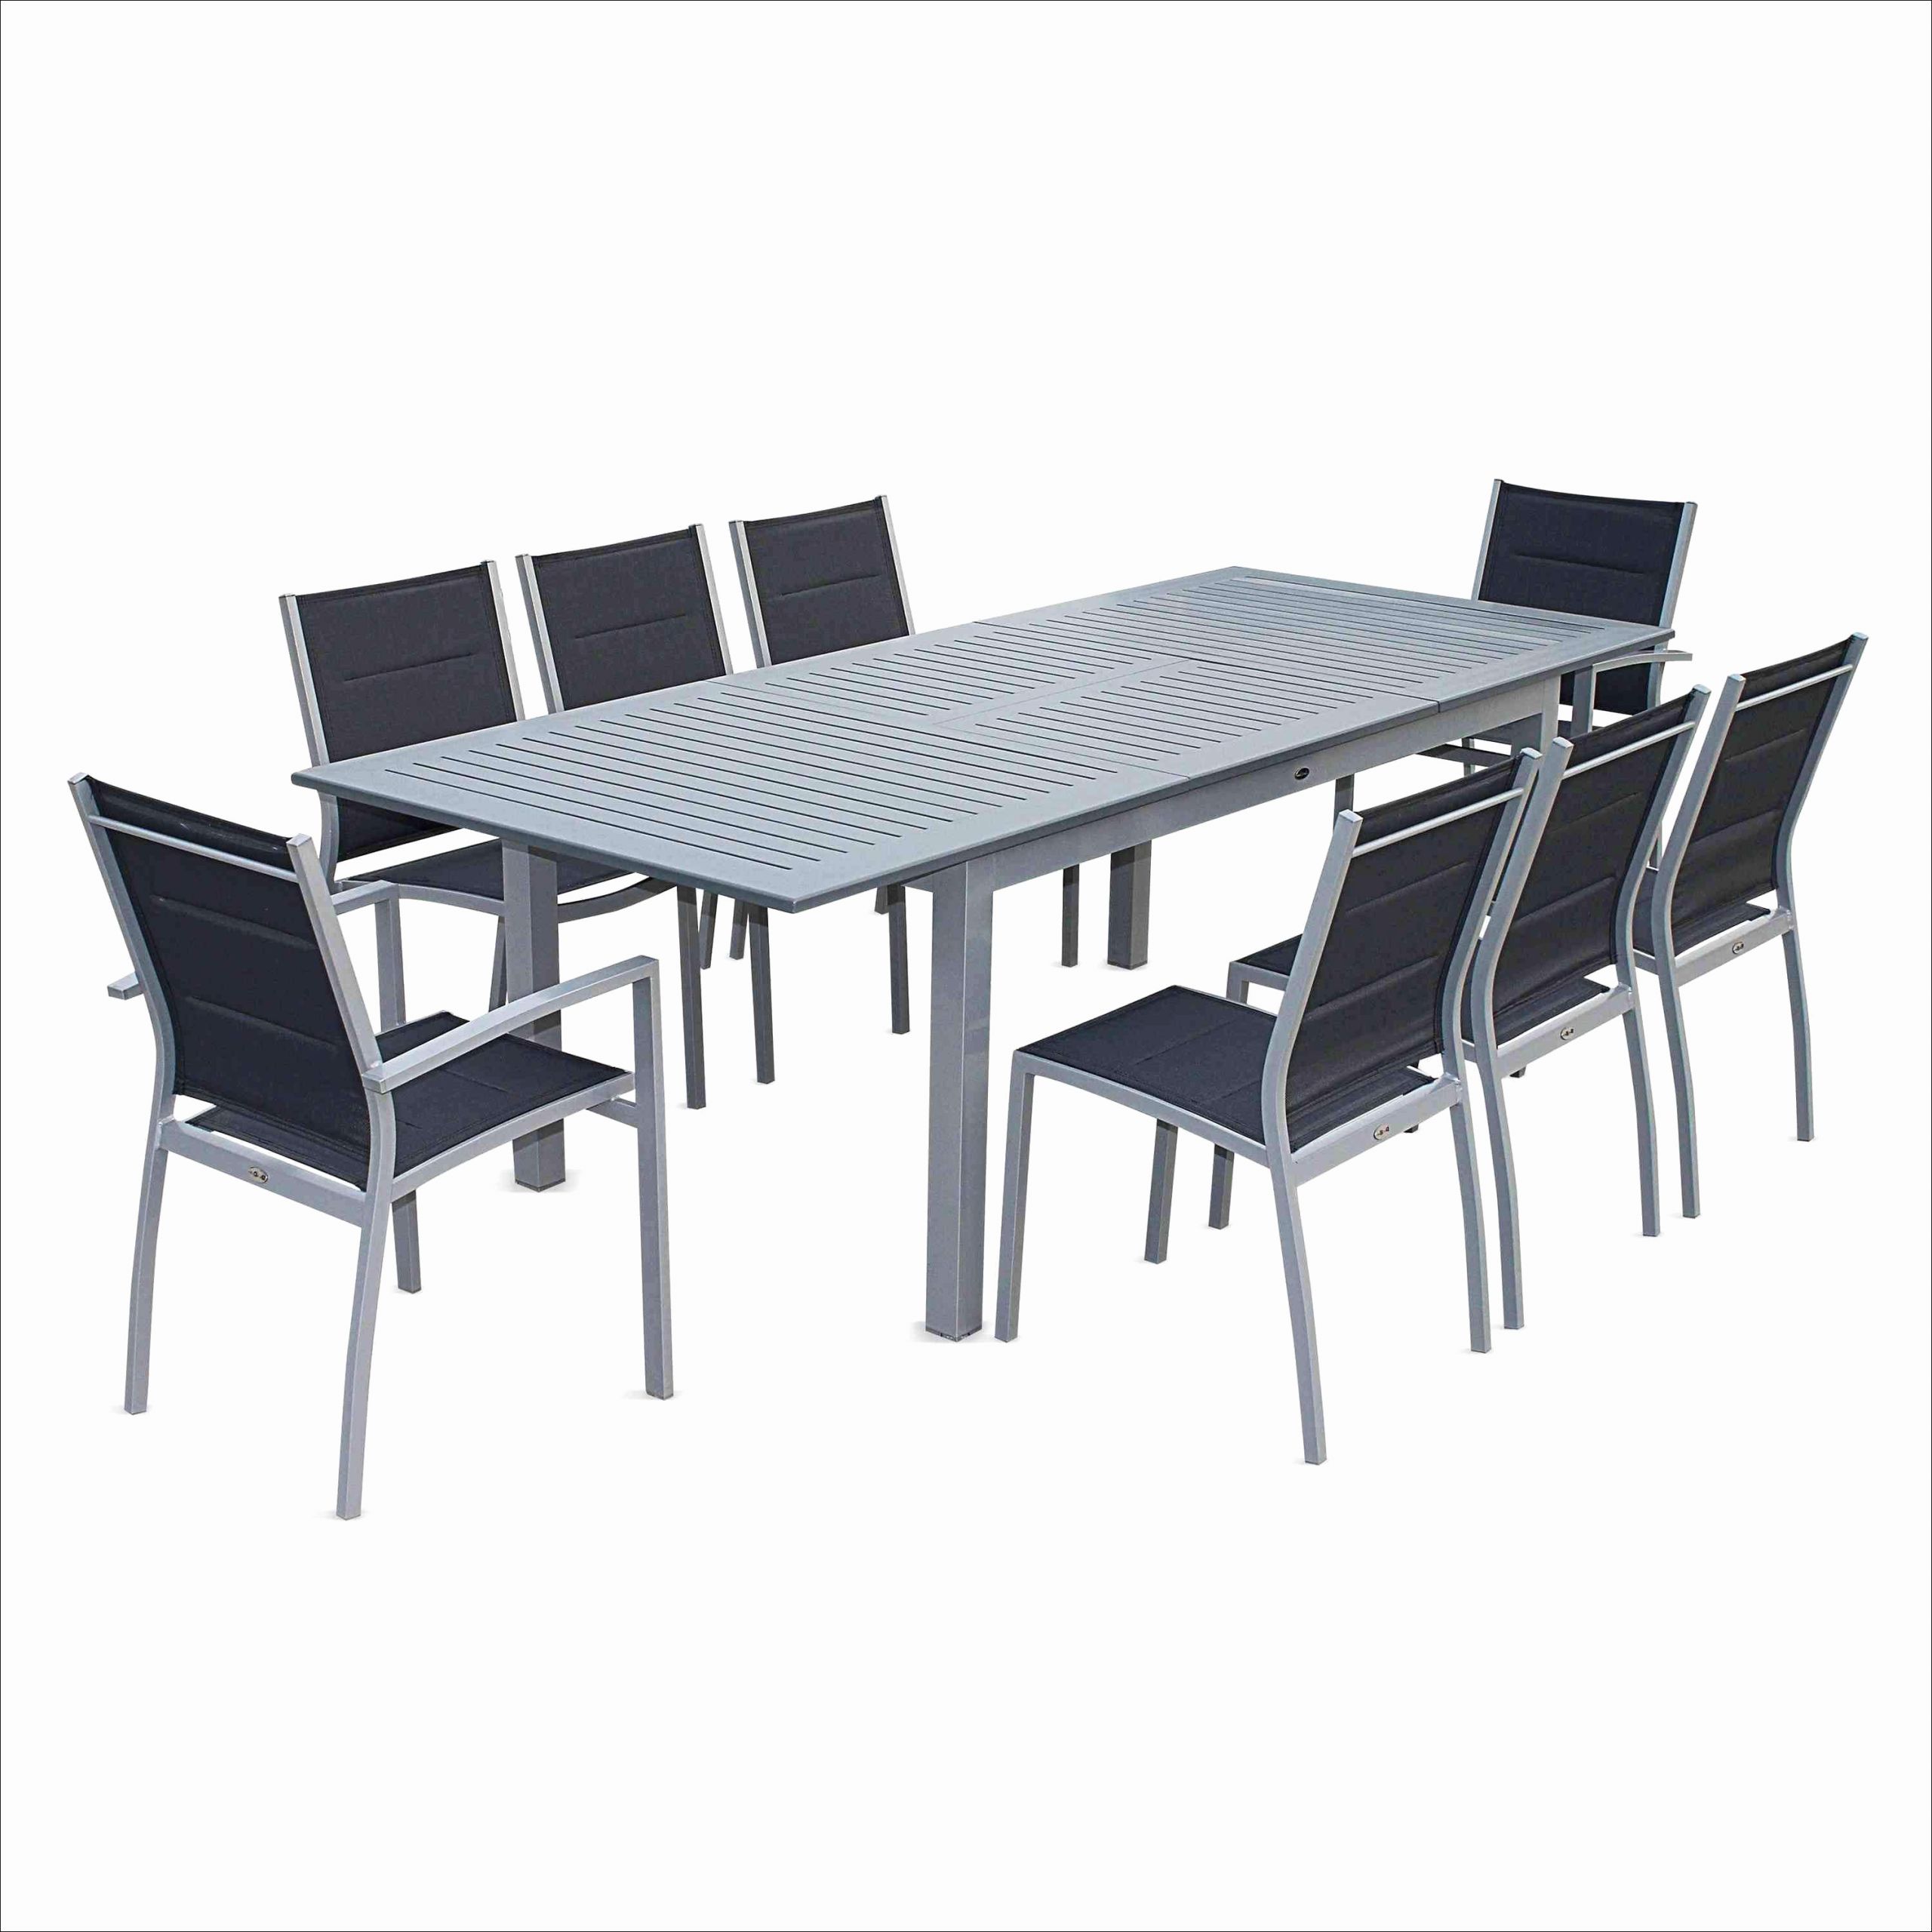 Table Extensible Alinea Luxe Table Et Chaise Pliante Table Et Chaise Pliante with Table